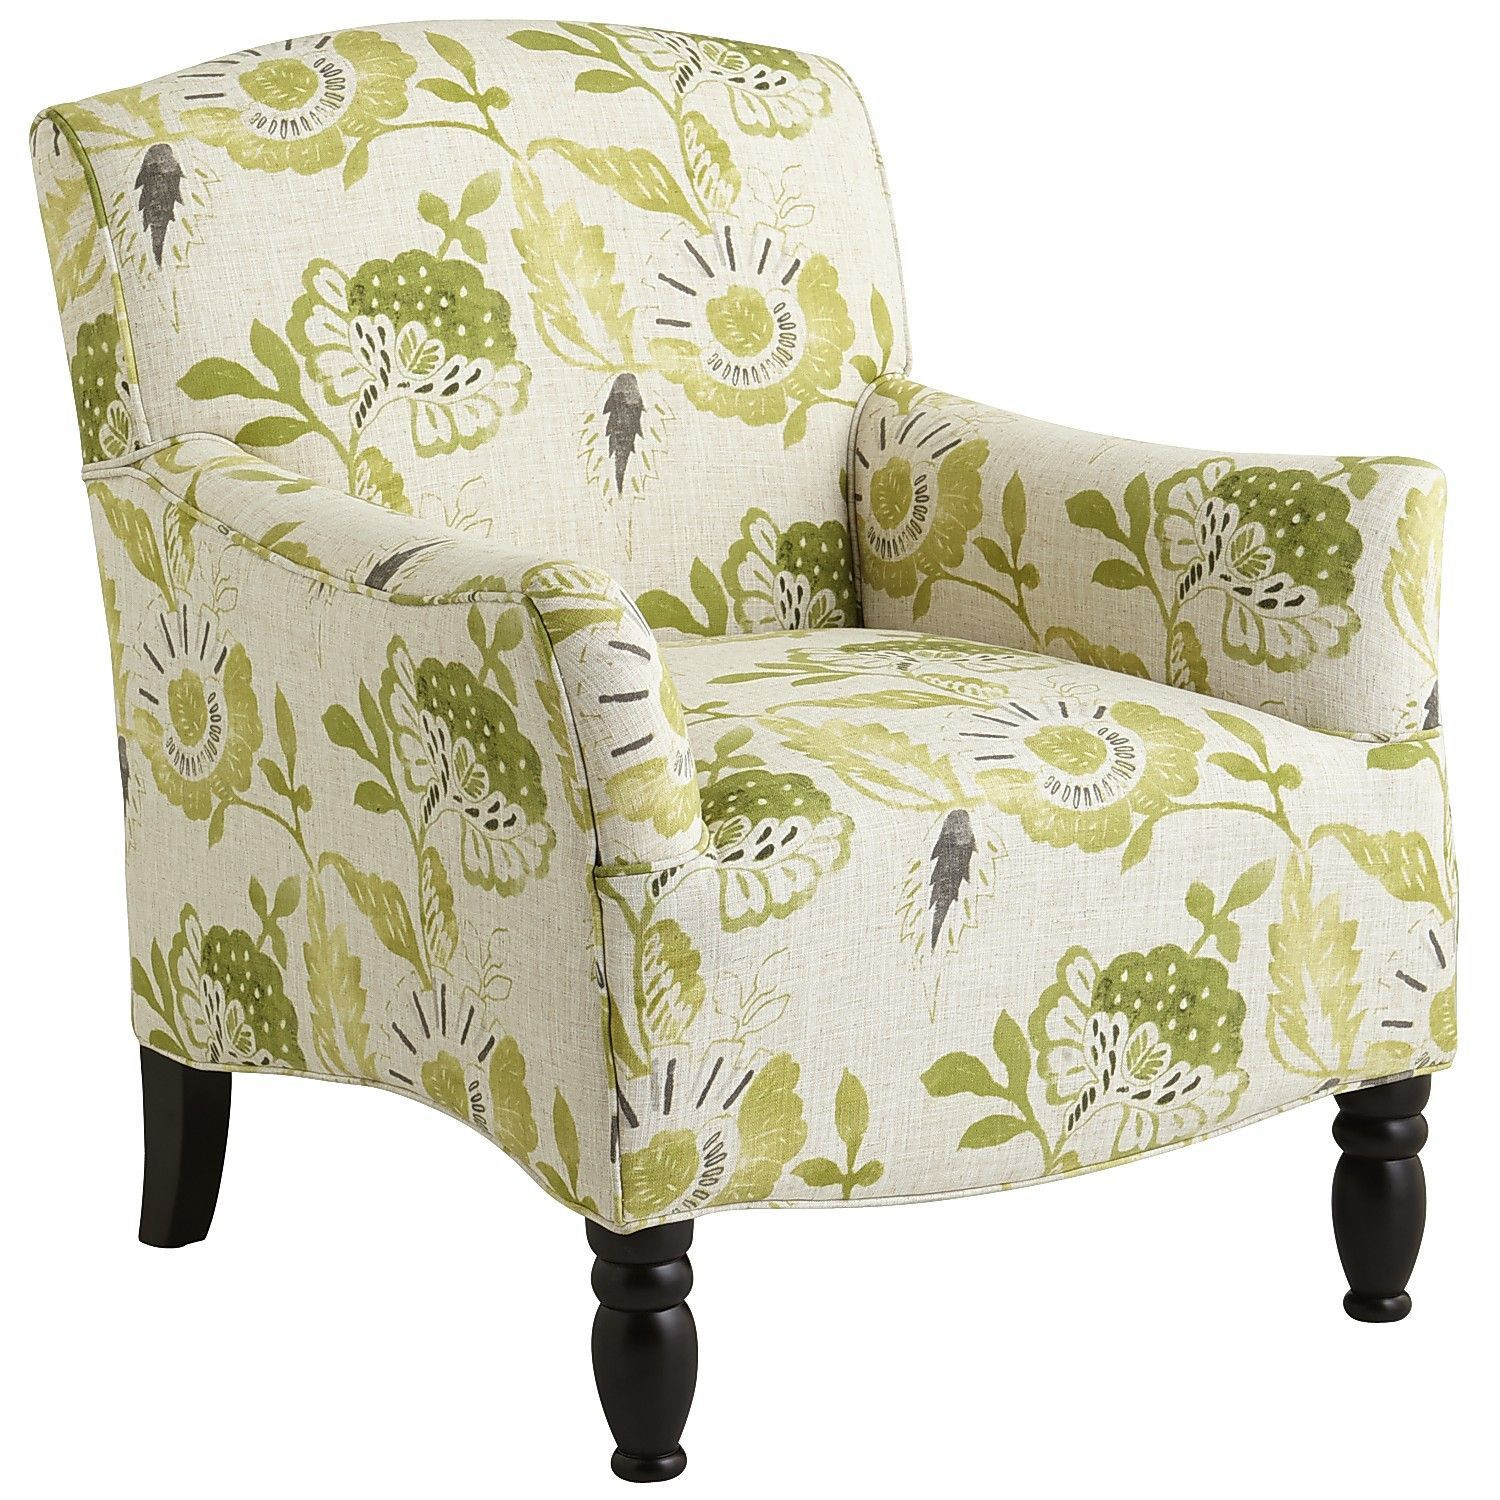 Pier One Living Room Chairs
 Pier 1 Frankie Chair Dally Green LOVE THIS CHAIR PIER